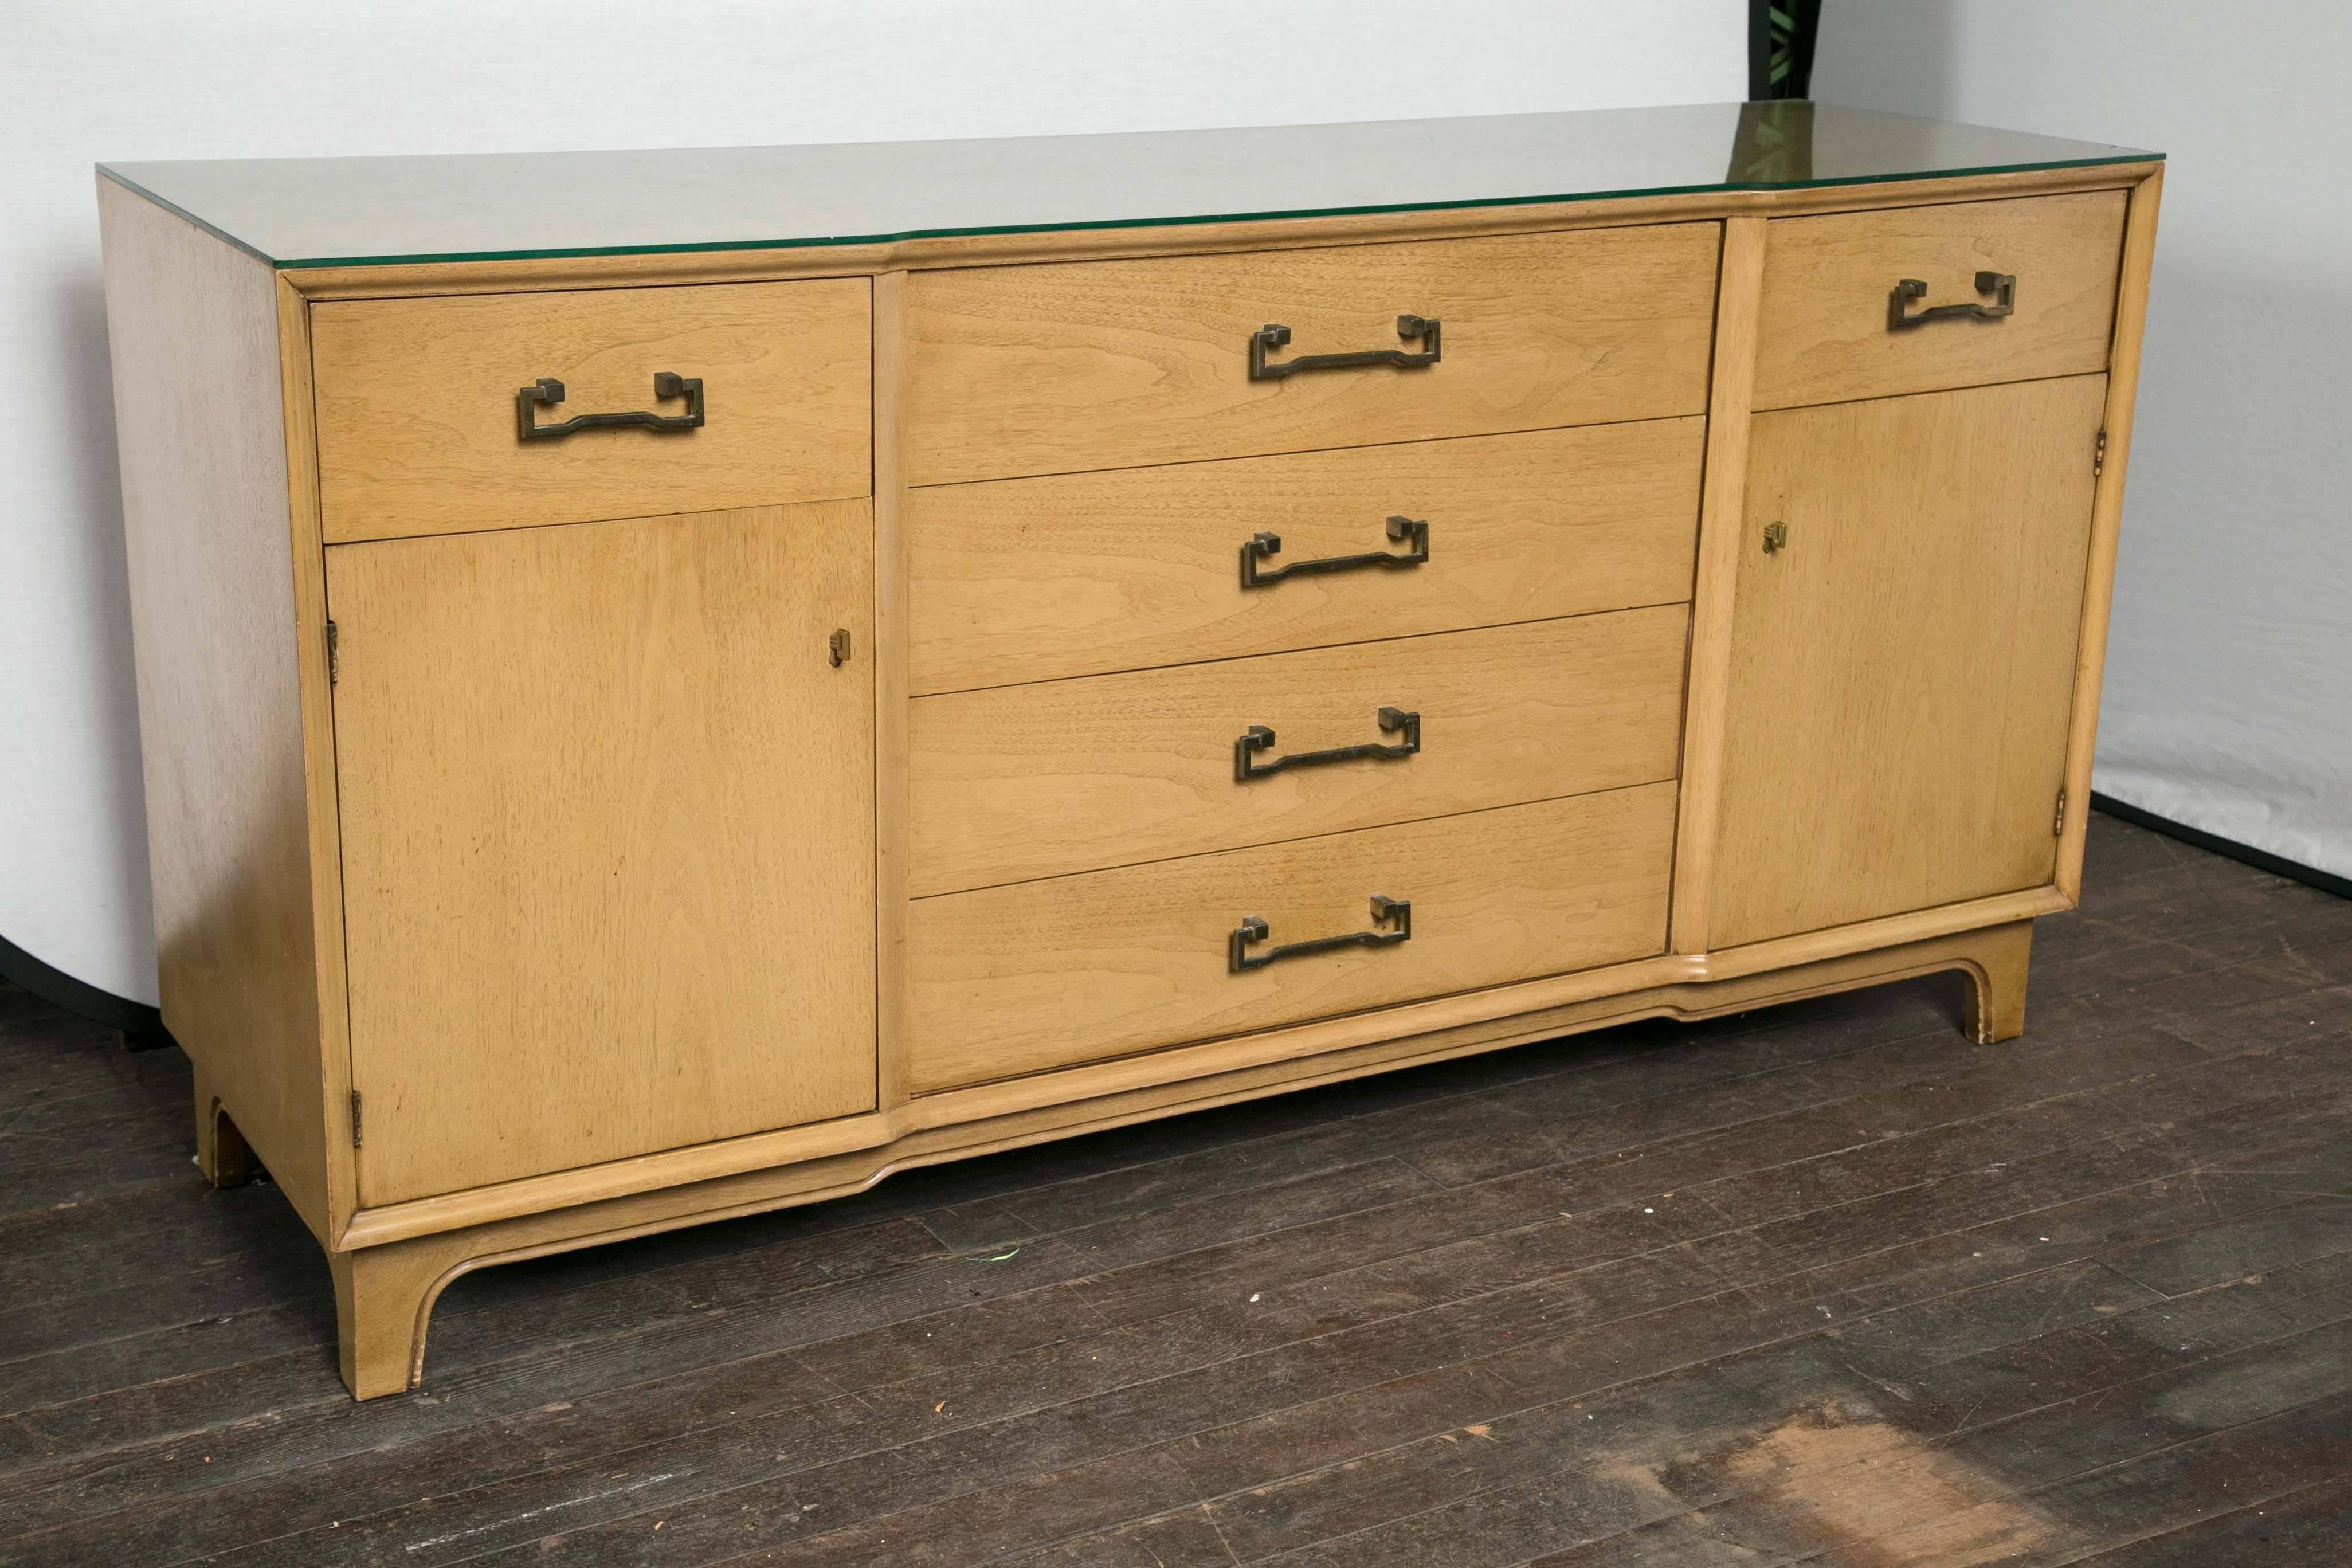 Light wood century furniture credenza, sideboard or buffet.